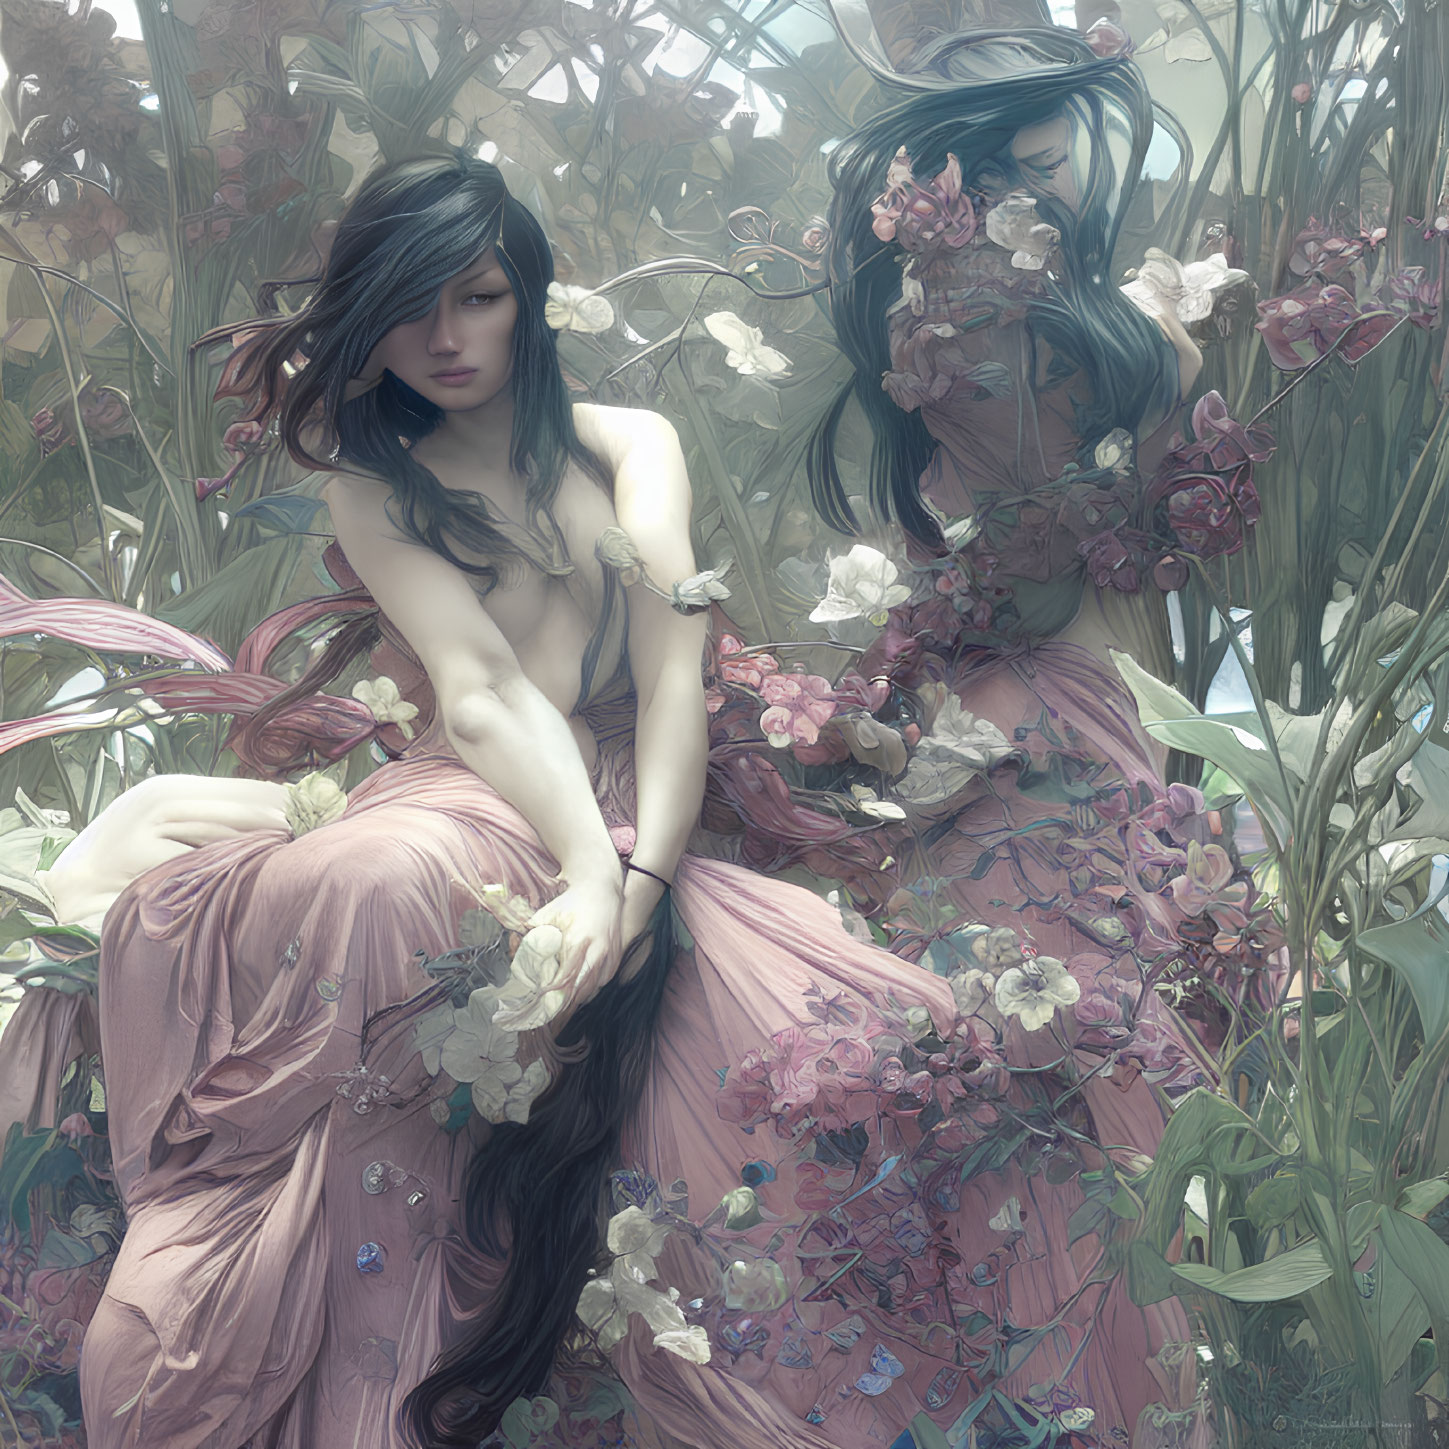 Ethereal women in flowing dresses with pink flowers in misty grove